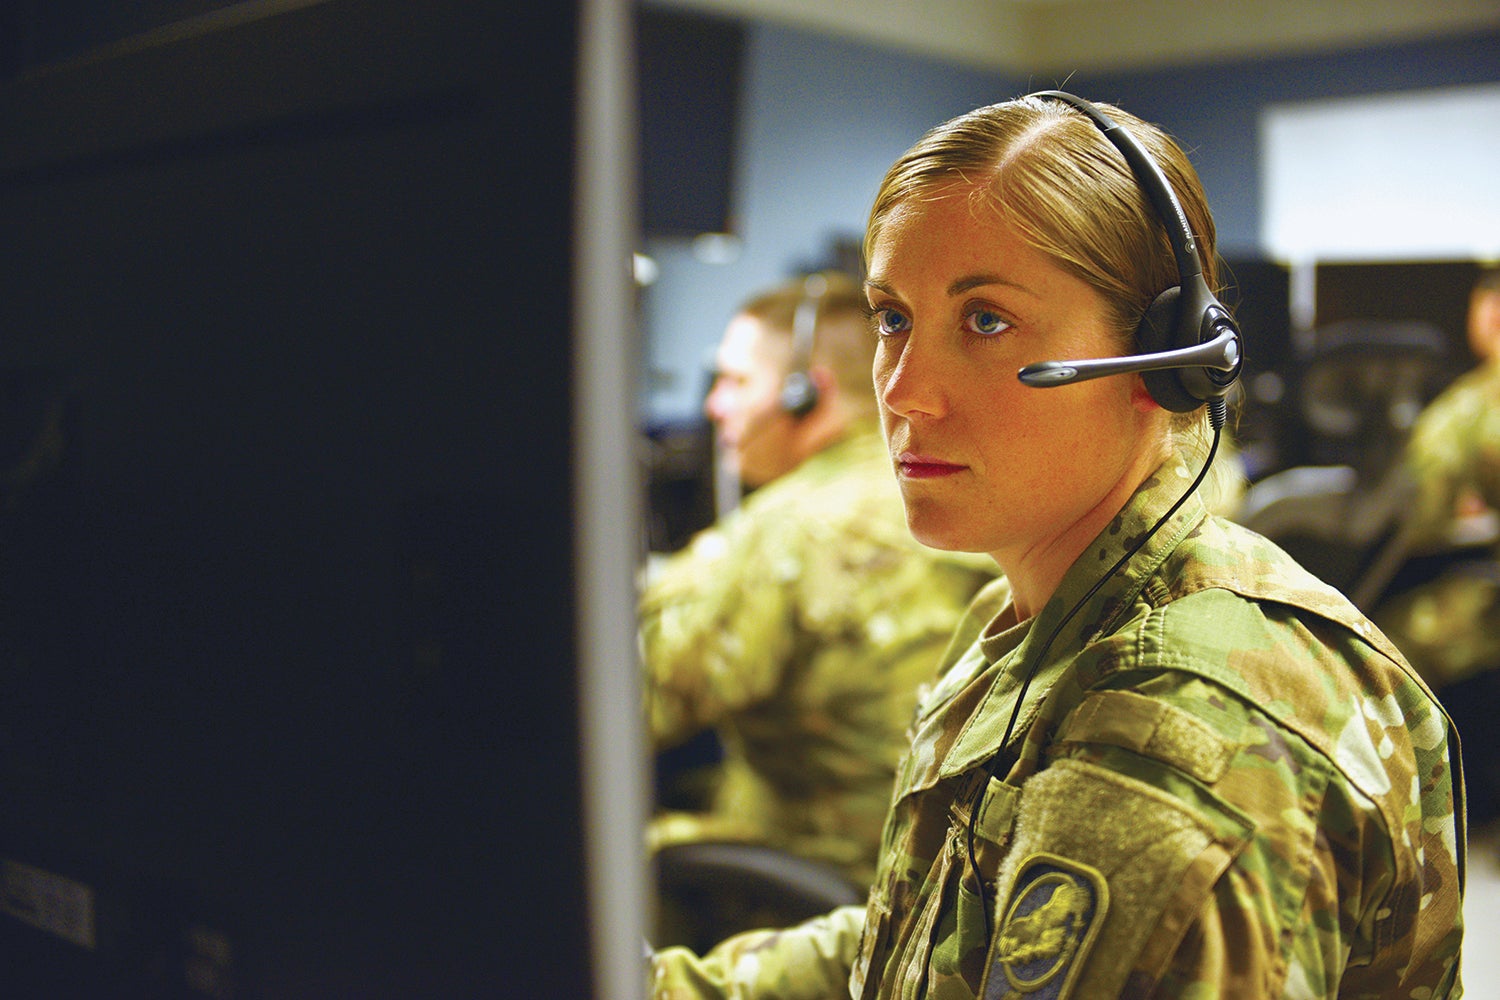 Sgt. Bethany Hendren of the Alaska Army National Guard’s 49th Missile Defense Battalion participates in a simulation at Fort Greely in 2018. (Credit: U.S. Army/Staff Sgt. Zachary Sheely)